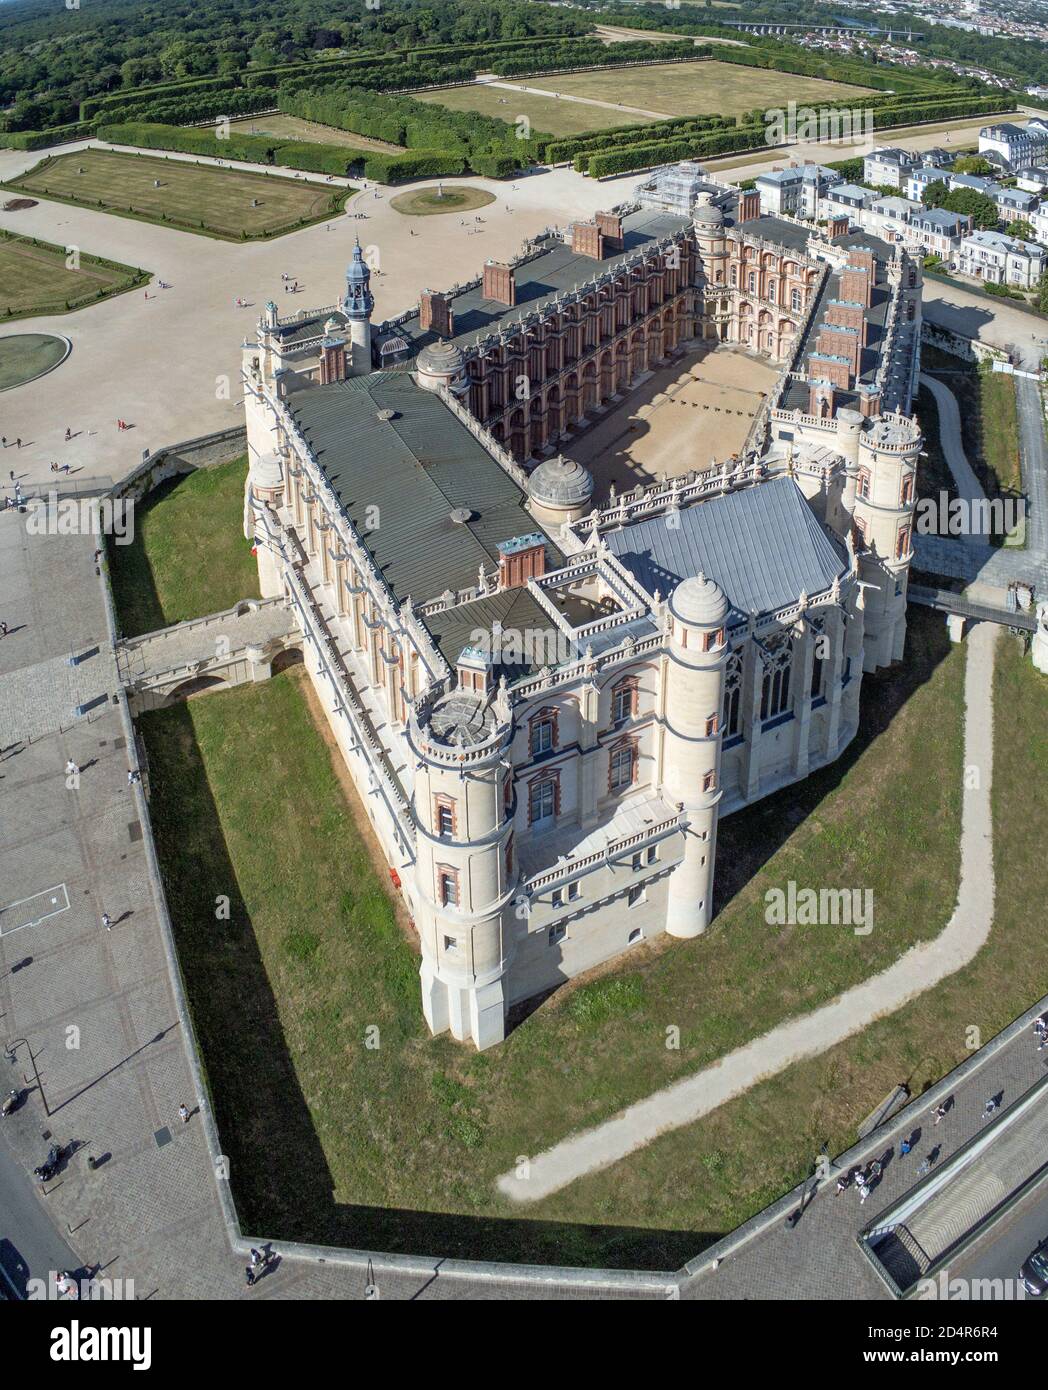 France, Yvelines, Saint Germain en Laye castle and the National Museum of Antiques (aerial view) Stock Photo